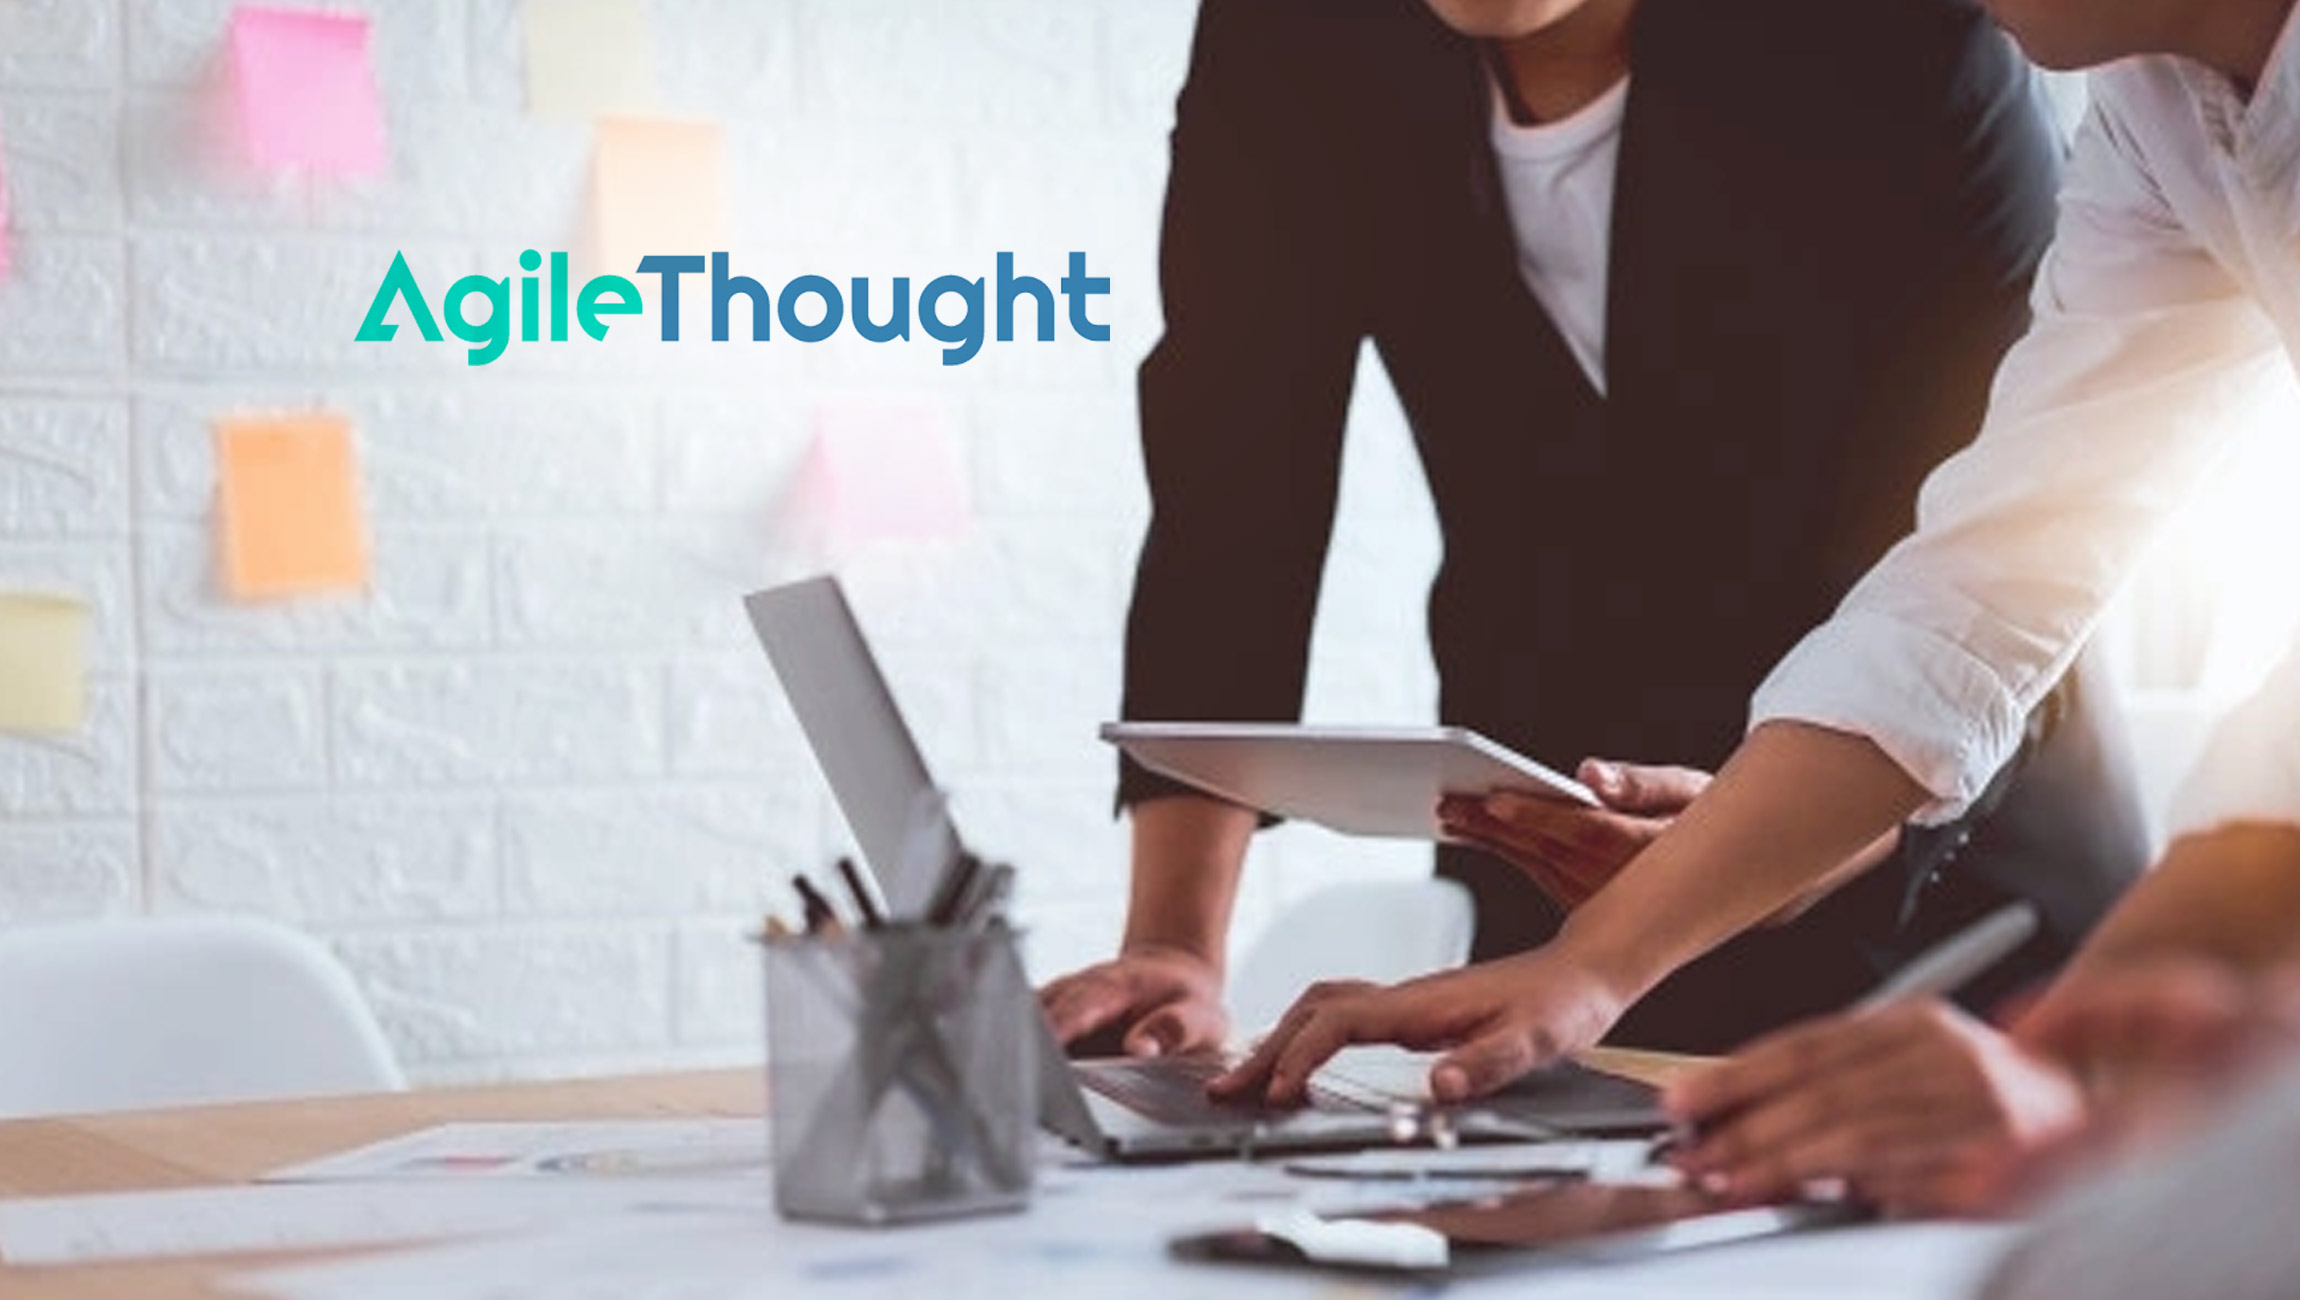 AgileThought creates a new market unit to serve the Technology, Media, and Telecom industry, and names Santiago Noziglia as SVP and General Manager